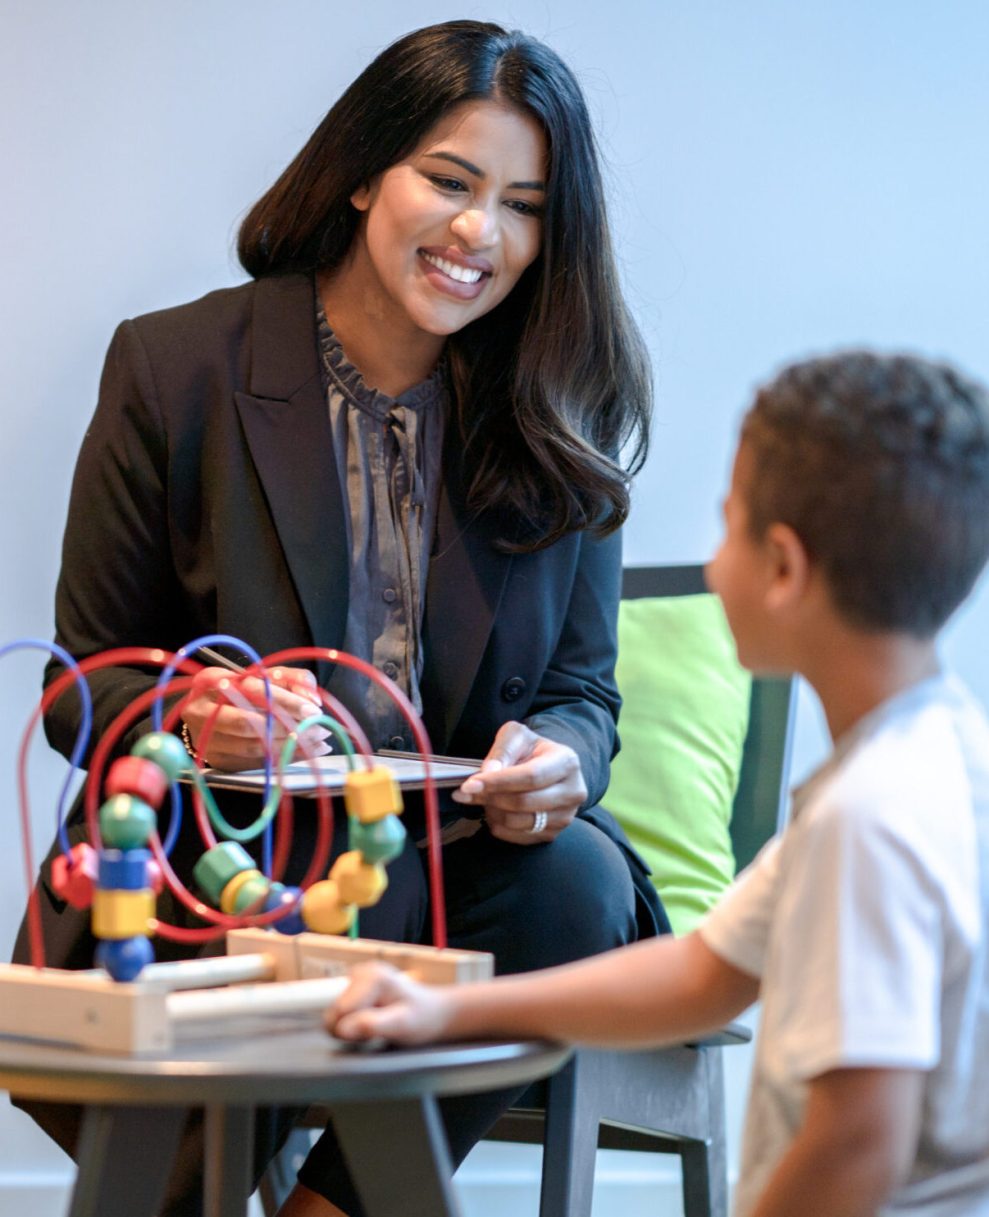 A female therapist sits in a chair beside her young patient as they play together with a bead maze. The therapist is dressed professionally in a suit and has a tablet out on her lap to take notes about the session. The young causally dressed boy is kneeling on the floor n front of the toy as they talk together.